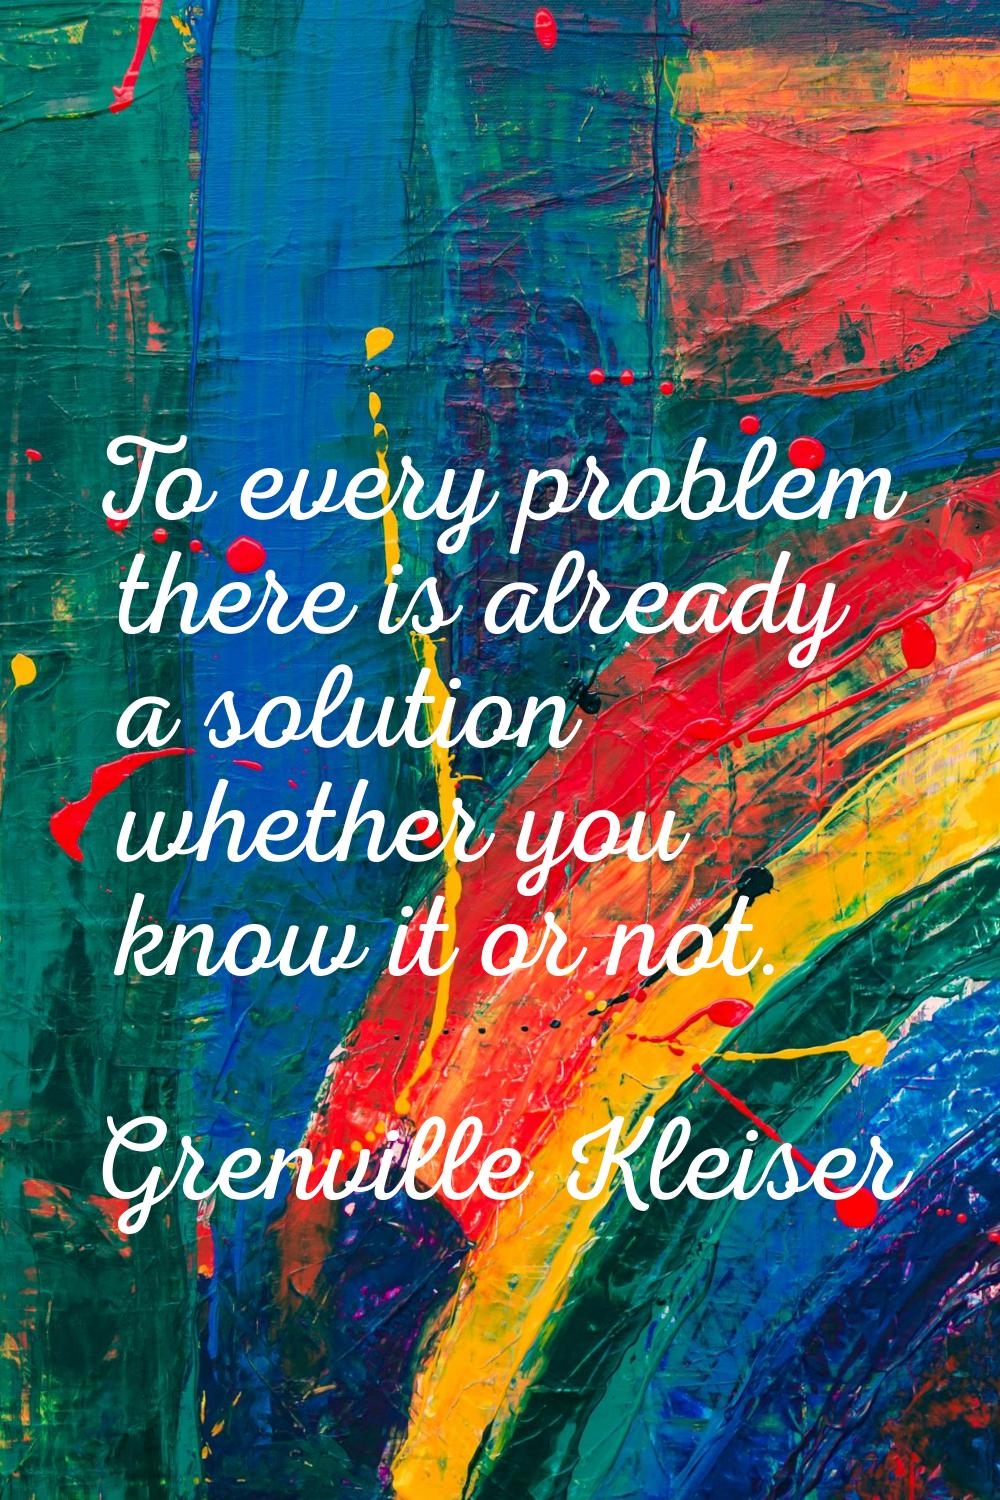 To every problem there is already a solution whether you know it or not.